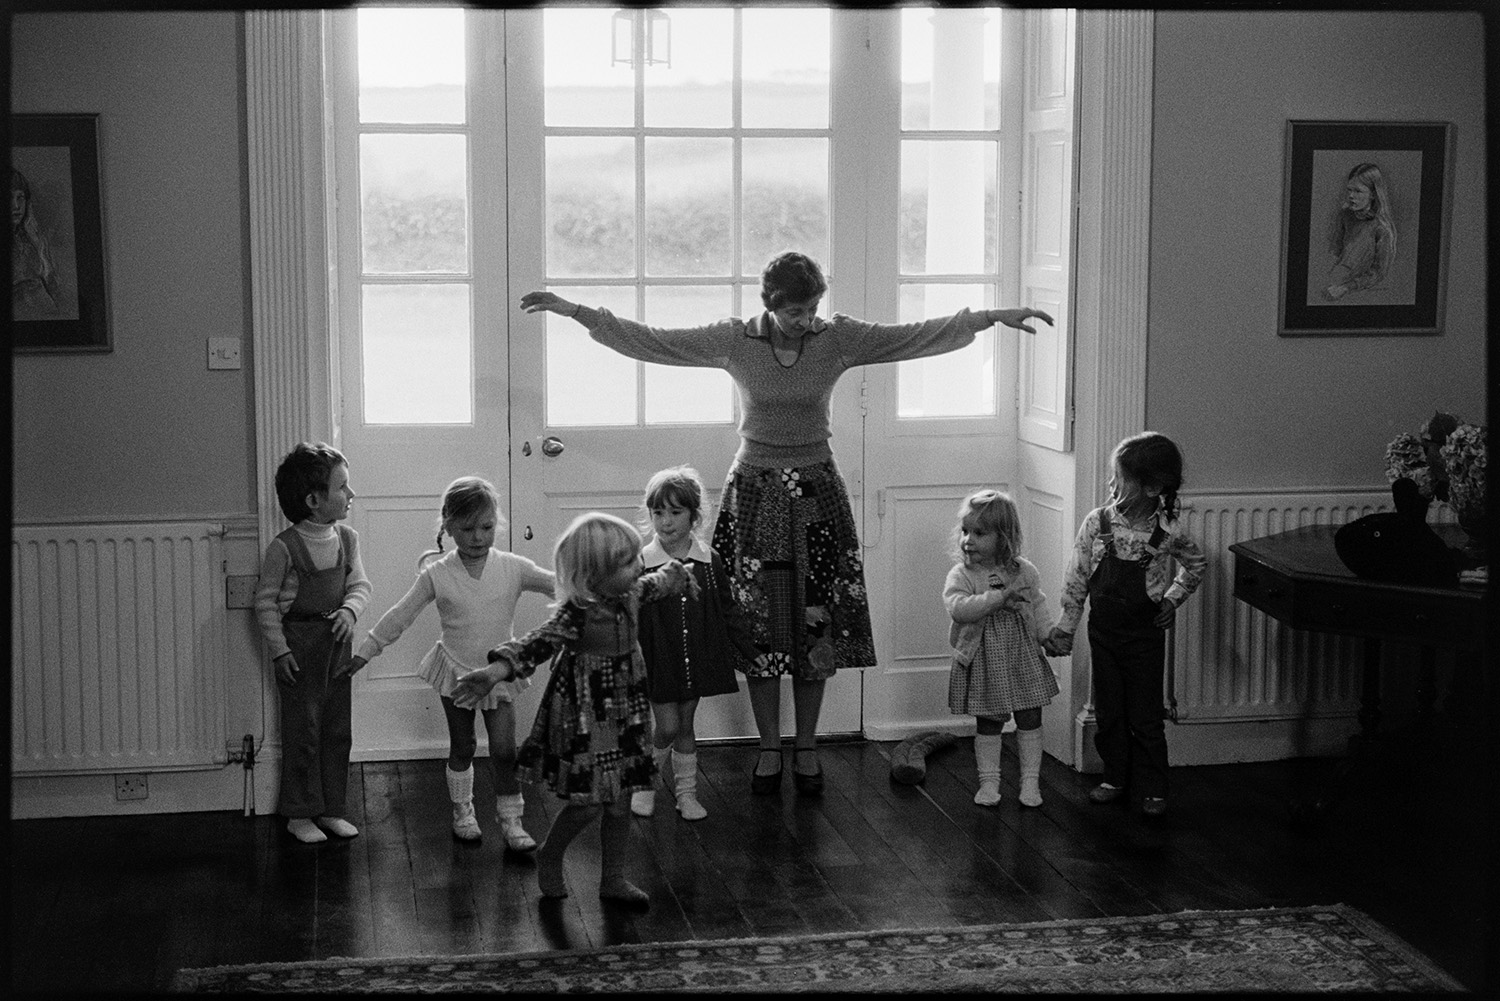 Children's dance class in large country house. Teacher.
[A woman teaching a dance class to children at Marwood House, by a large doorway.]